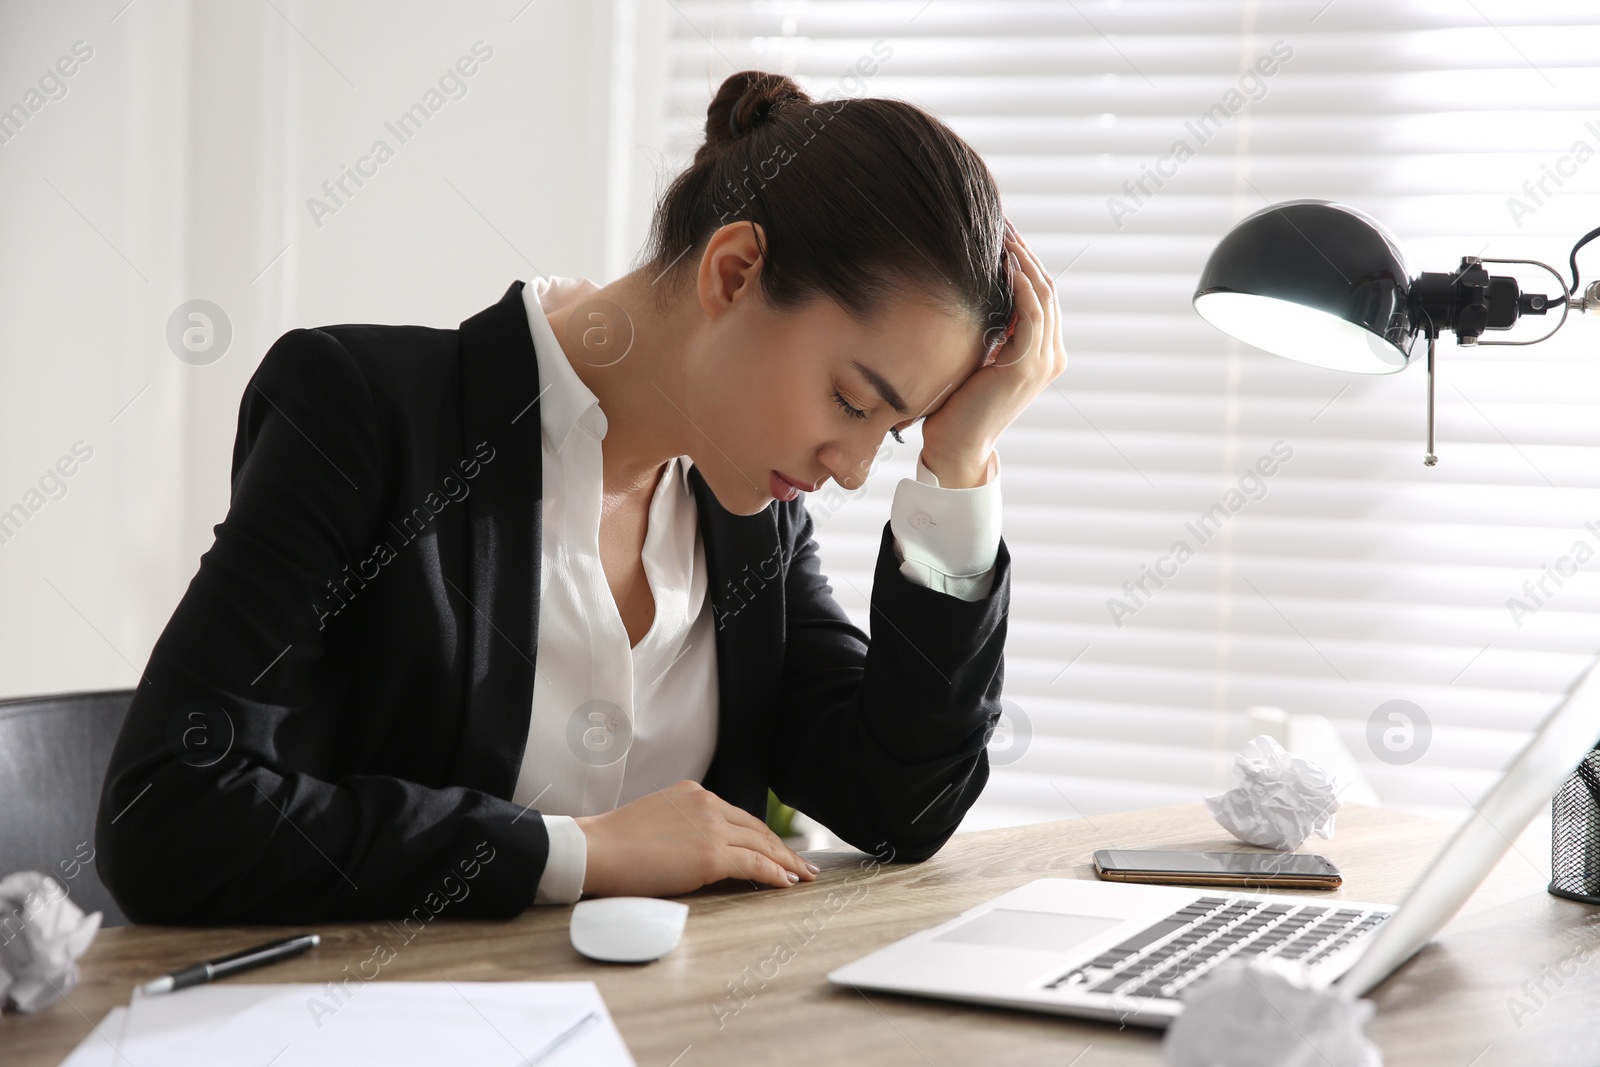 Photo of Stressed and tired young woman at workplace